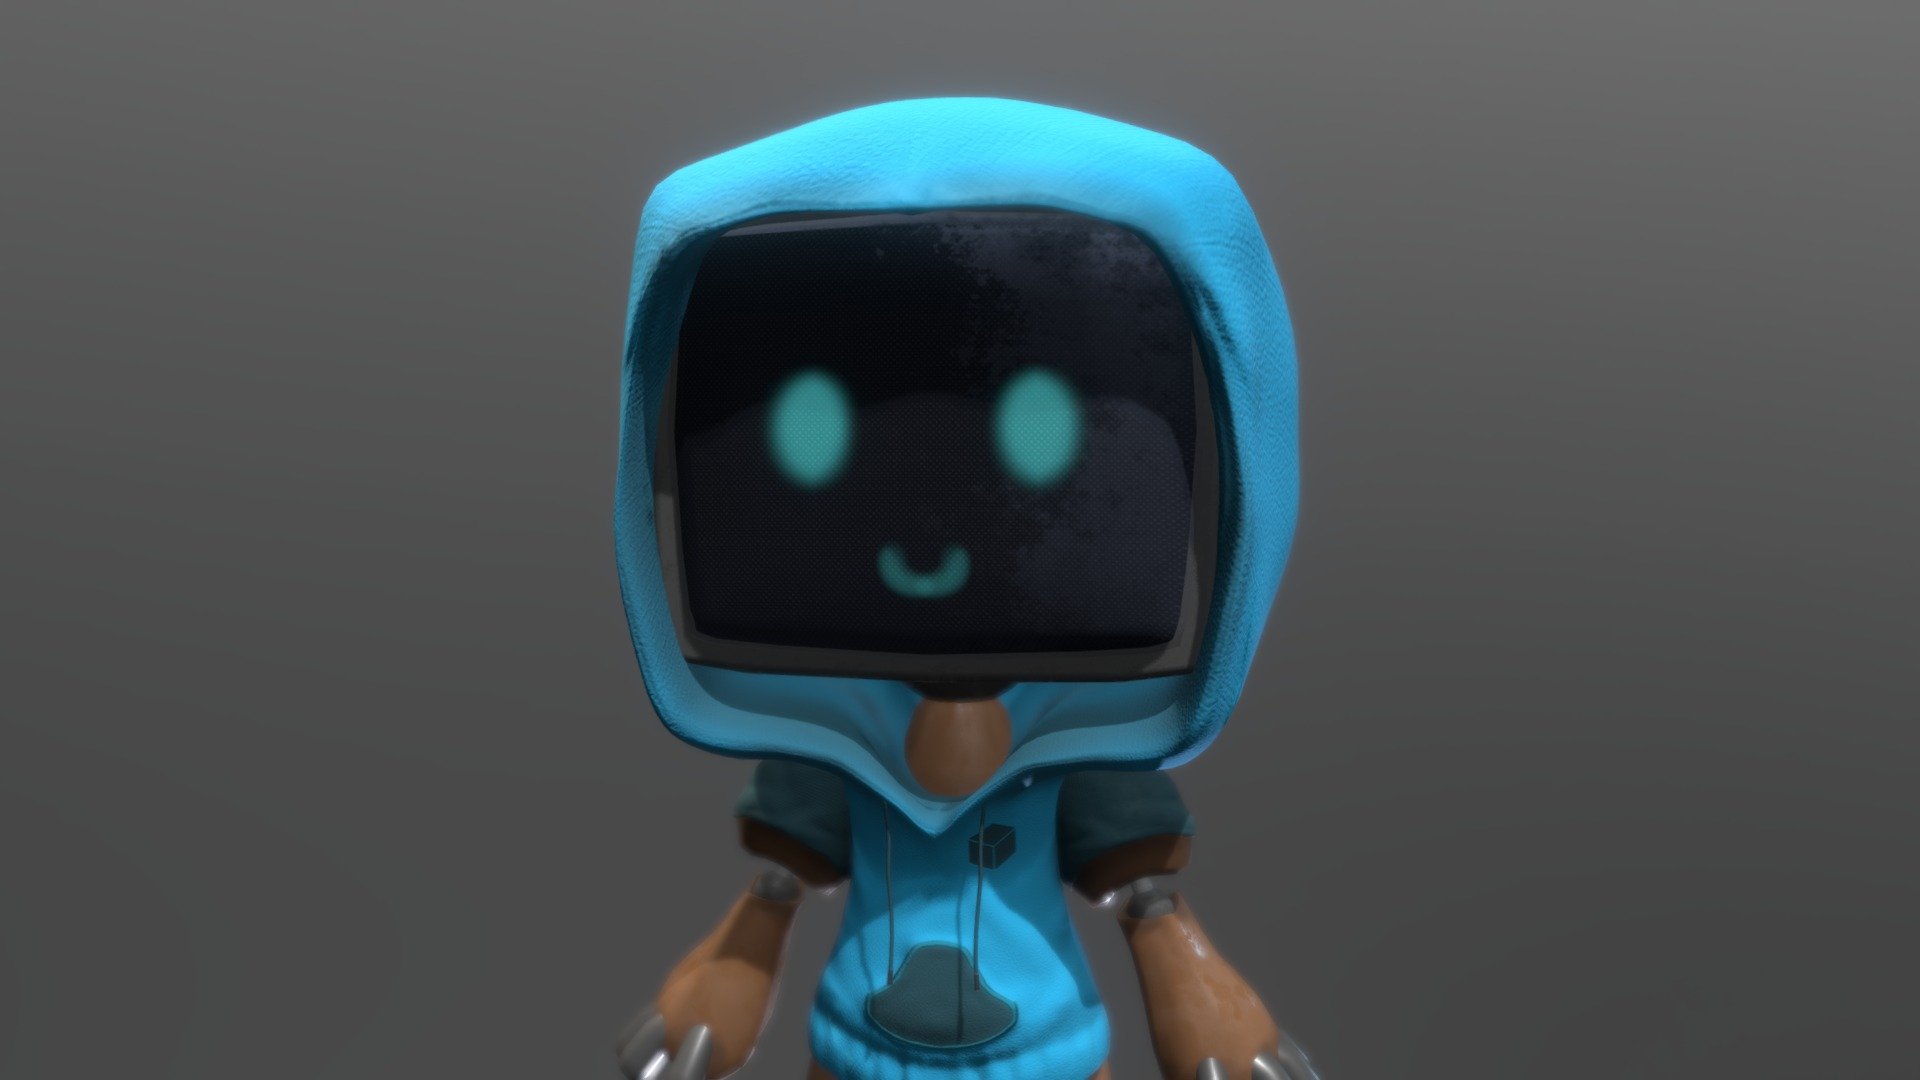 Little guy I made for the scetchbot challenge, tried to make him look cute and interesting by sticking him in a hoodie, had a lot of fun making him too 3d model